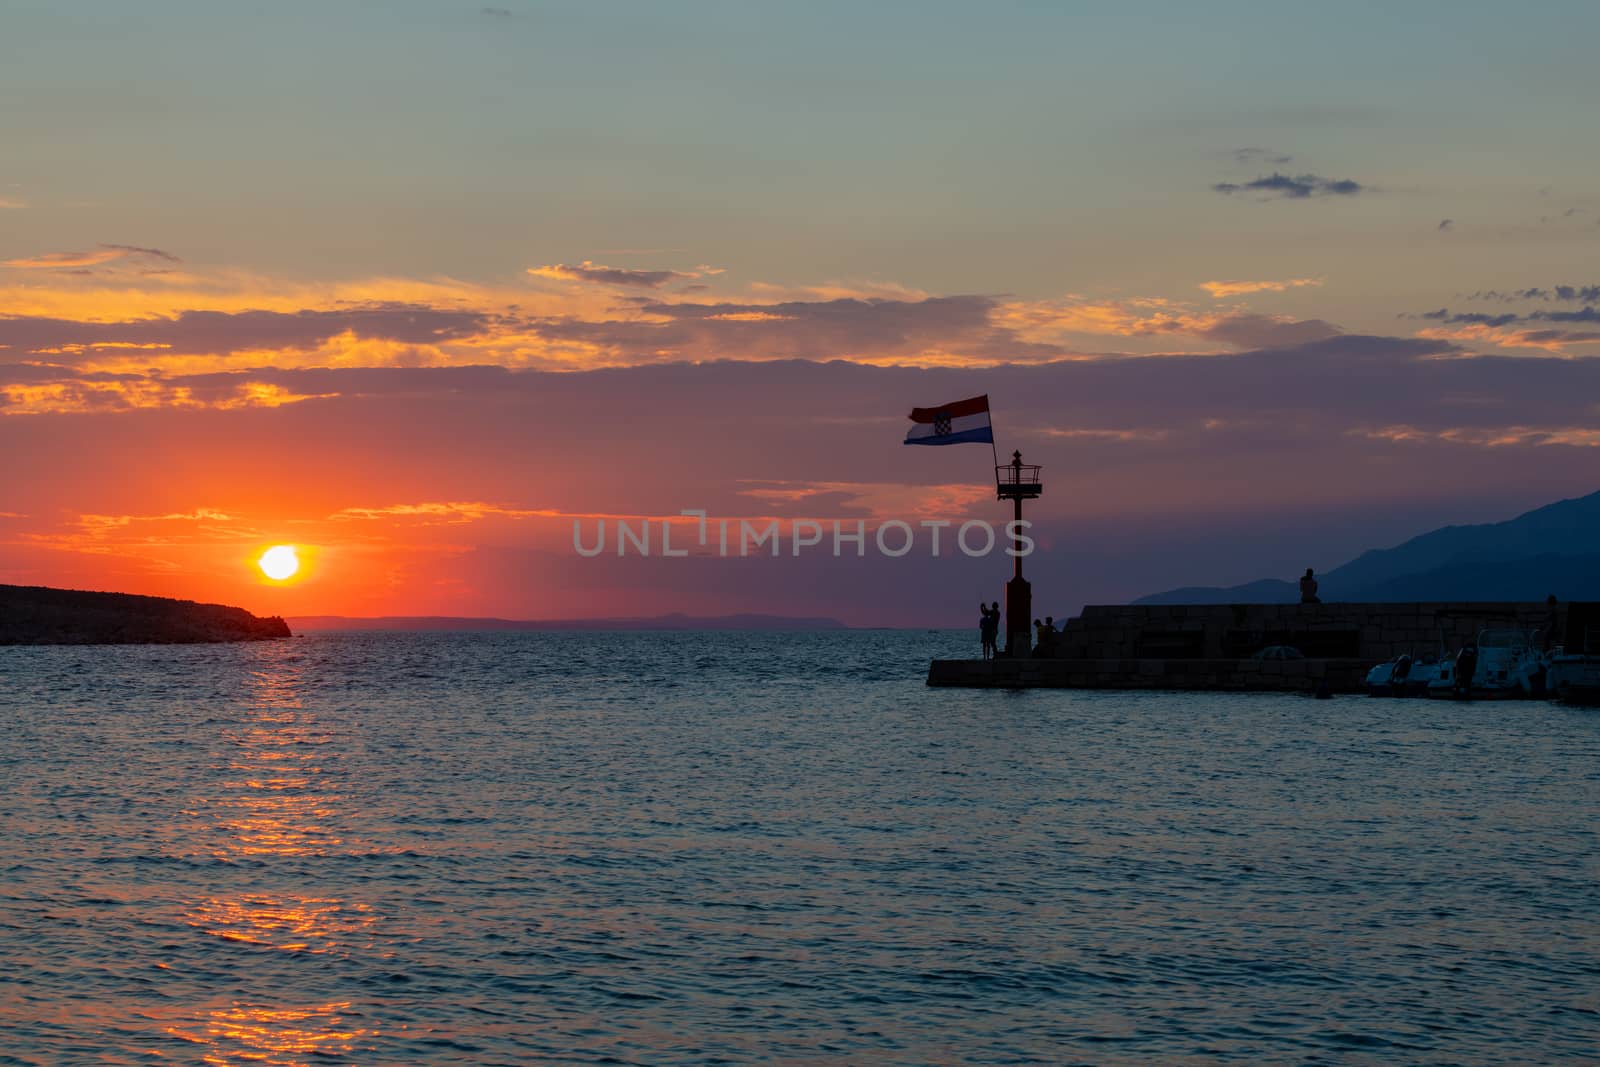 Croatian flag flying in wind at sunset in harbor, all people silhuetted and unrecognizable